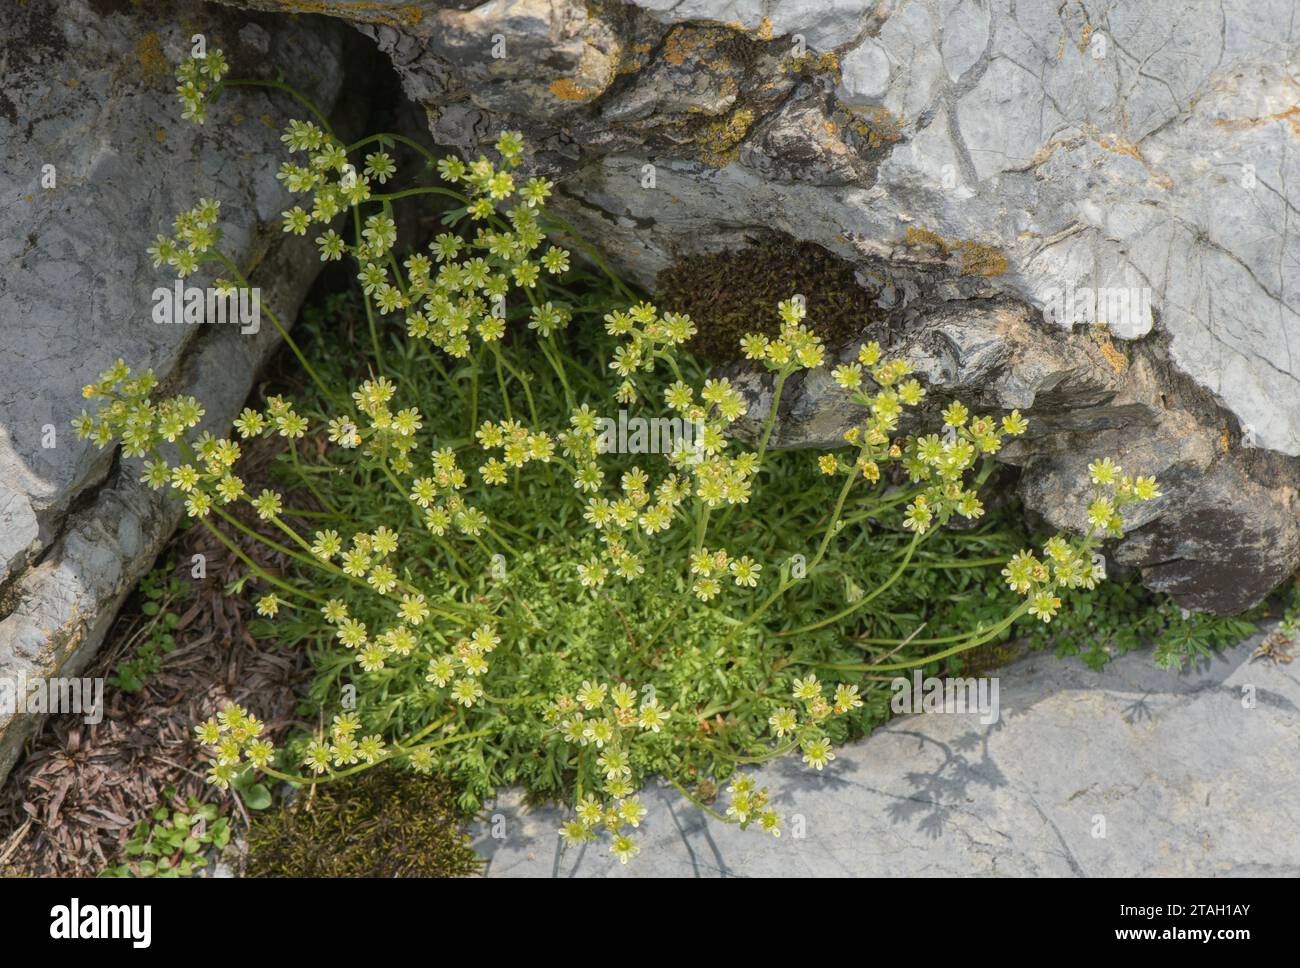 Musky saxifrage, Saxifraga exarata ssp moschata, in flower in the Pyrenees. Stock Photo